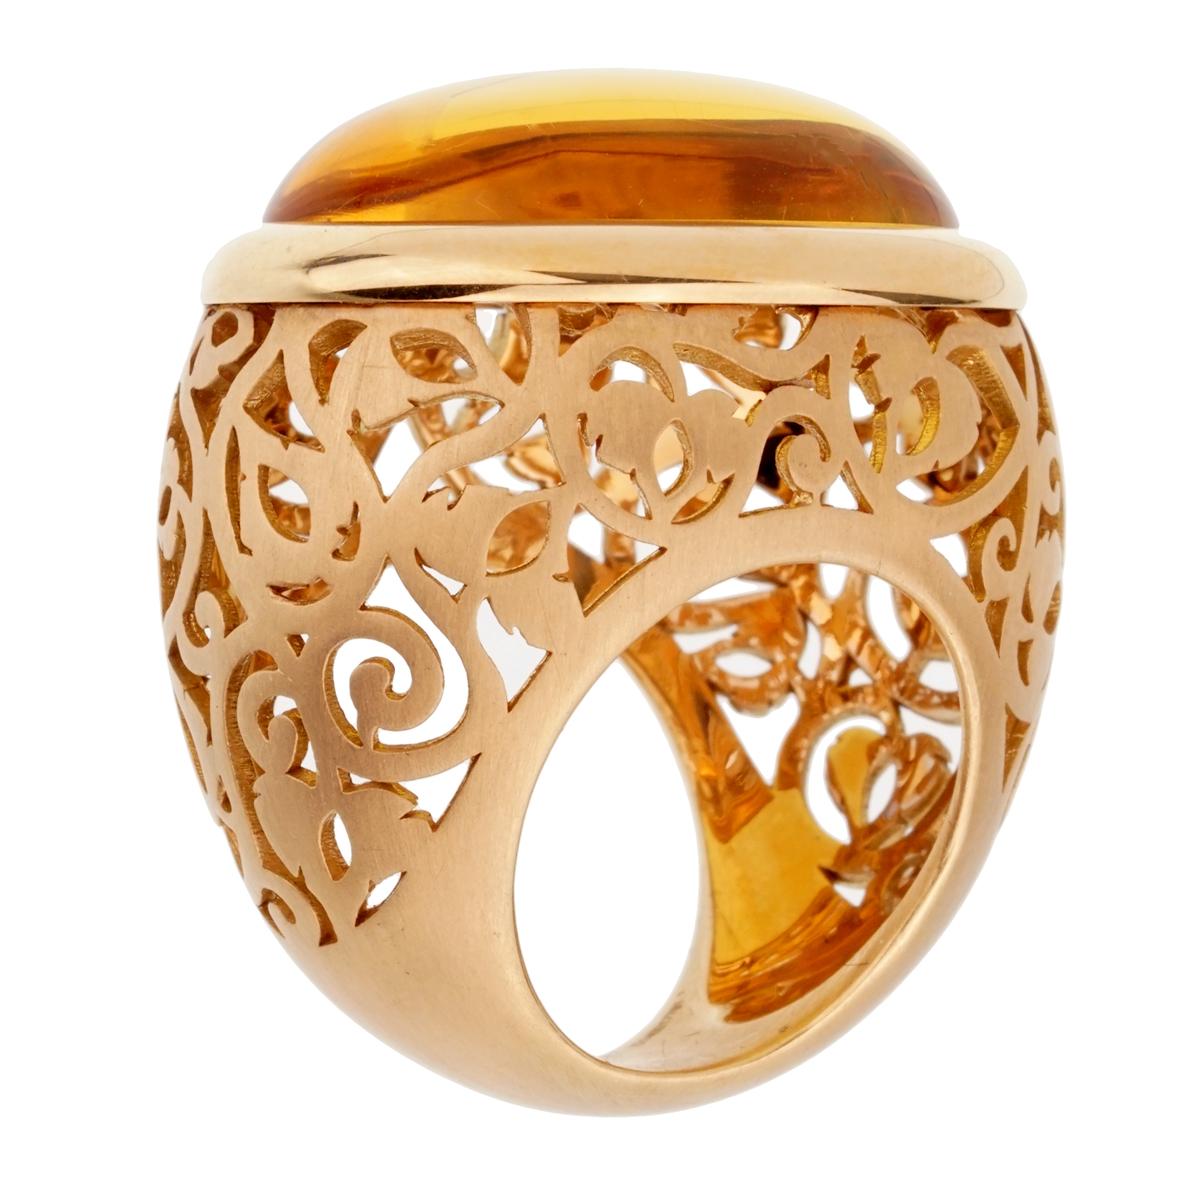 A magnificent brand new Pomellato rose gold cocktail ring showcasing a 19.94ct cabochon Amber. The ring measures a size 6 and can be resized.

Pomellato Retail Price: $7,800
Sku: 2323